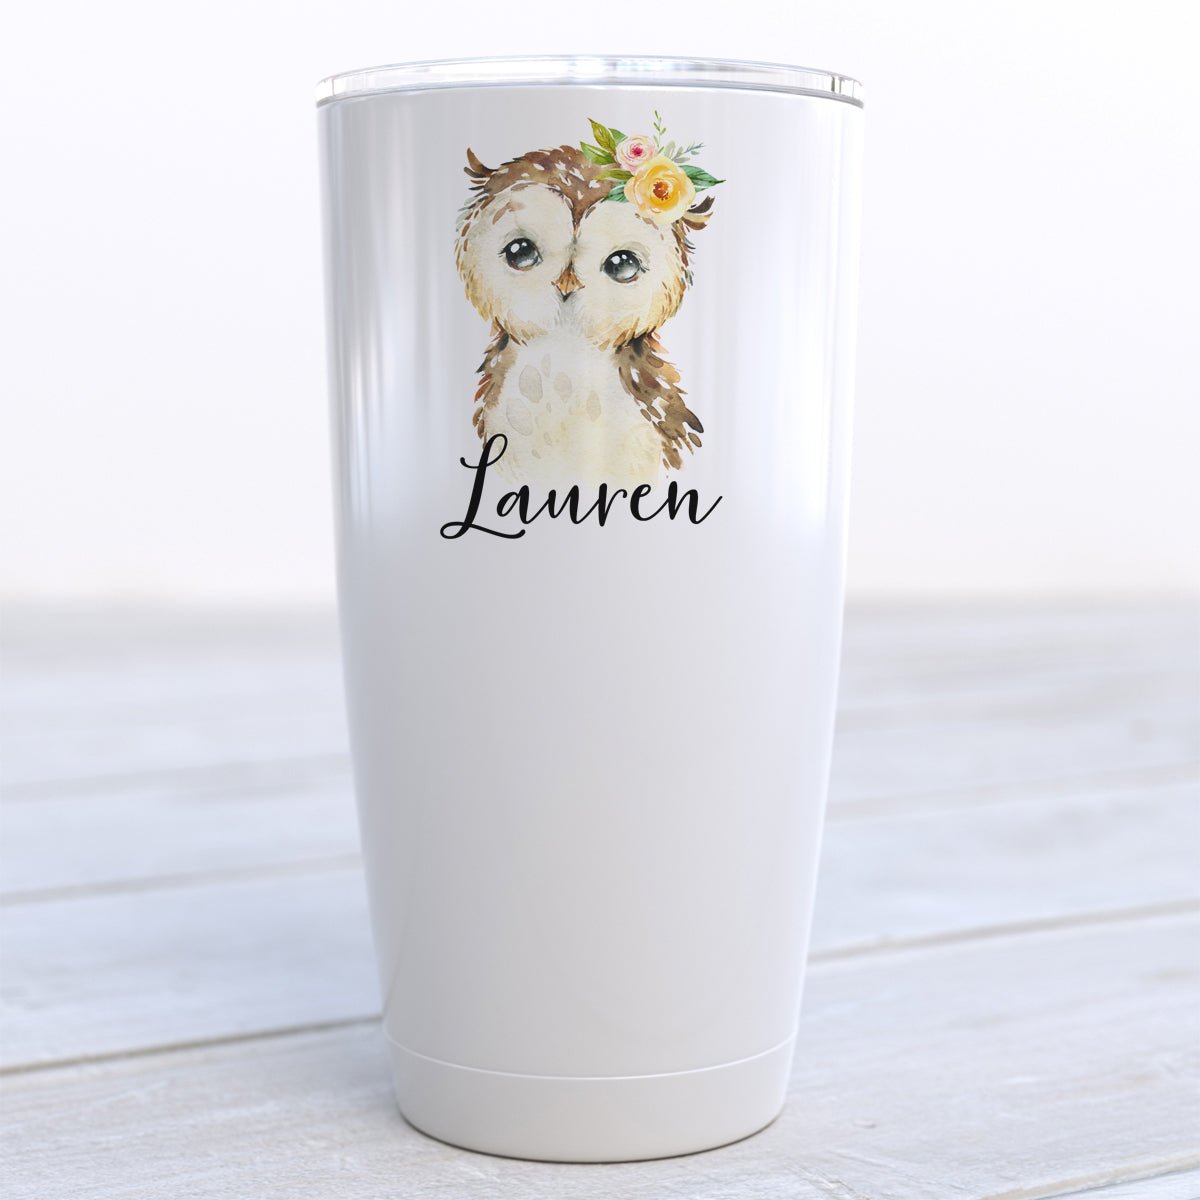 Personalized Owl Floral Travel Cup - Zookaboo